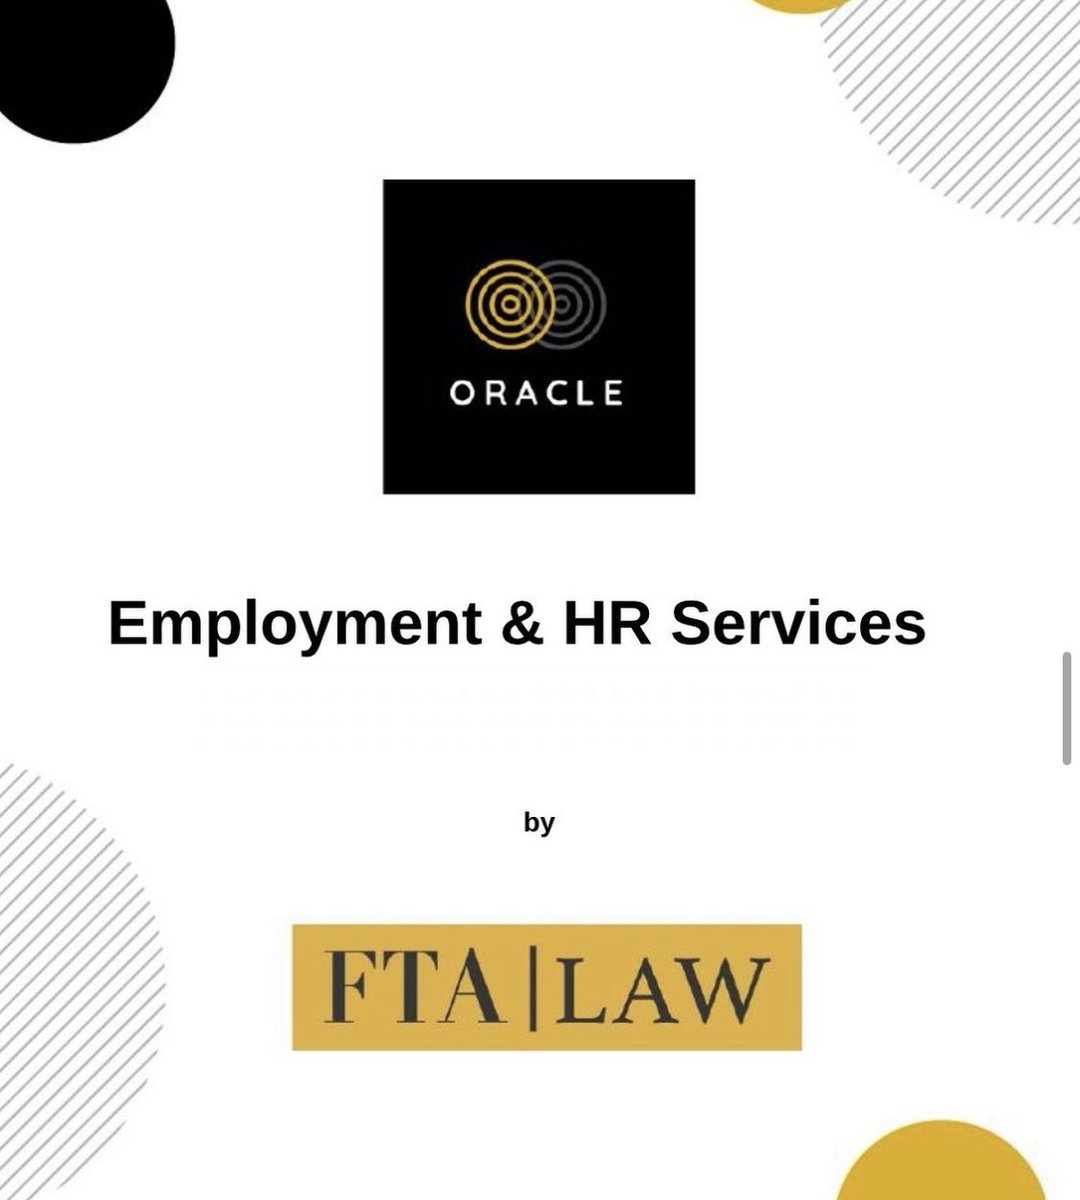 Did you know FTA Law offer an Employment and HR subscription service?

Contact FTA Law today to find out more about our Oracle service!

#oracle #subscription #subscriptionservice #employmentlaw #hrsupport #ftalaw #lawfirm #wecanhelp